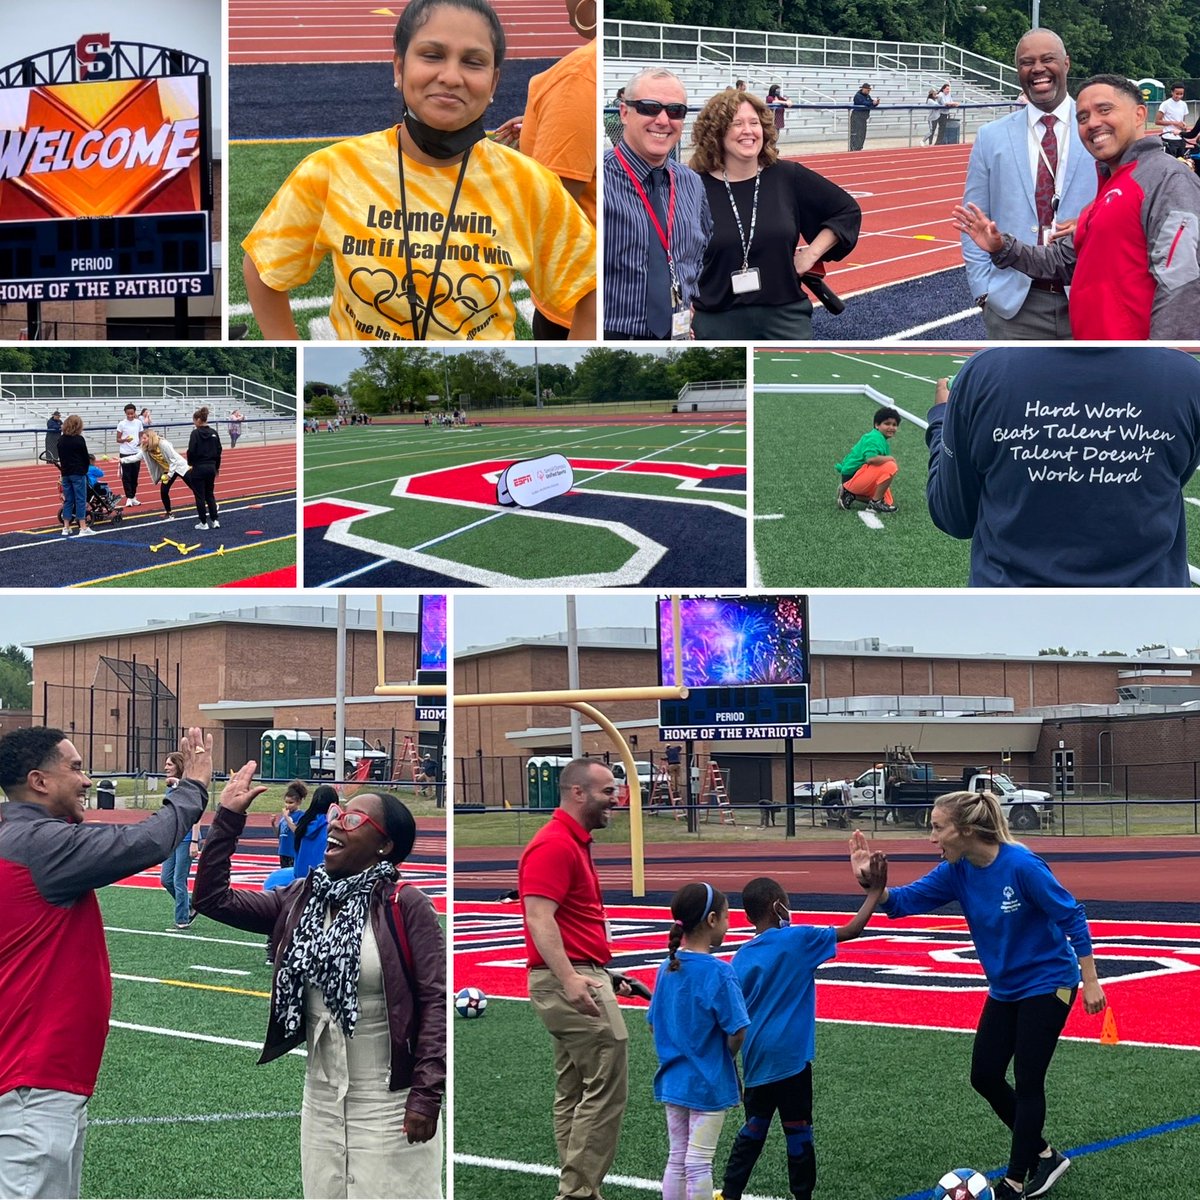 🥇Unified Sports Olympics are underway ⁦@SCSchools⁩ and EVERYONE is enjoying this special opportunity. #EVERYBODYCOUNTS #EVERYBODYLEARNS ⁦@UnifiedSportsNY⁩ ⁦@cmclos574⁩ ⁦@MrsMirandaAD⁩ ⁦@SSS_SCSD⁩